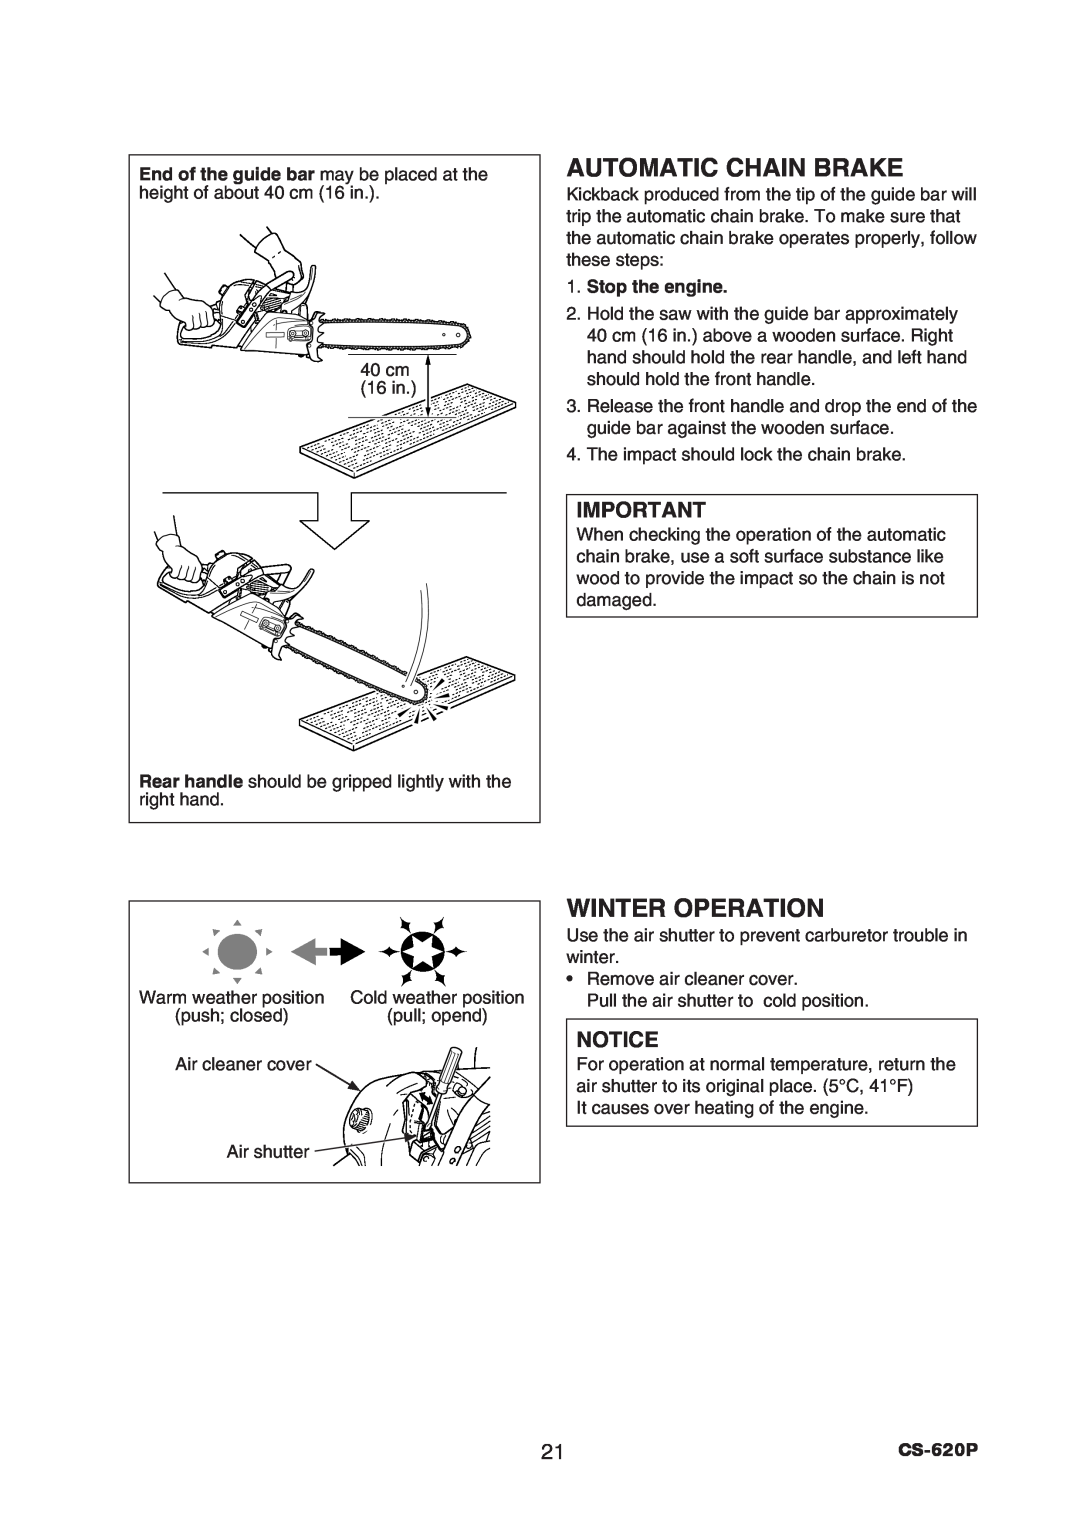 Echo CS-620P instruction manual Automatic Chain Brake, Winter Operation, Stop the engine 